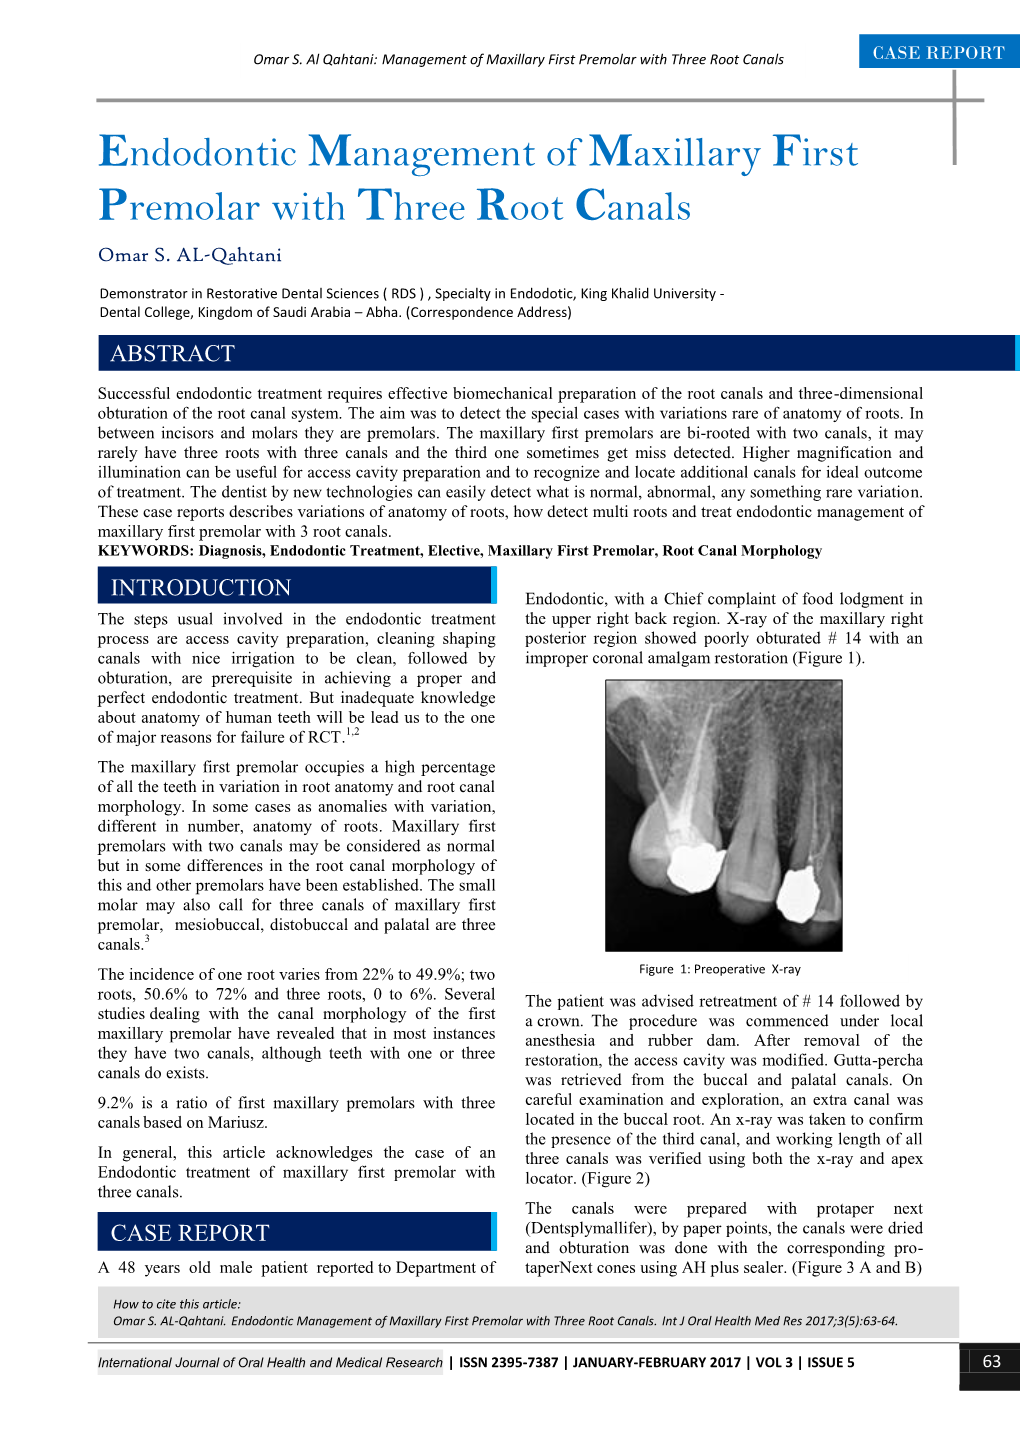 Endodontic Management of Maxillary First Premolar with Three Root Canals Omar S